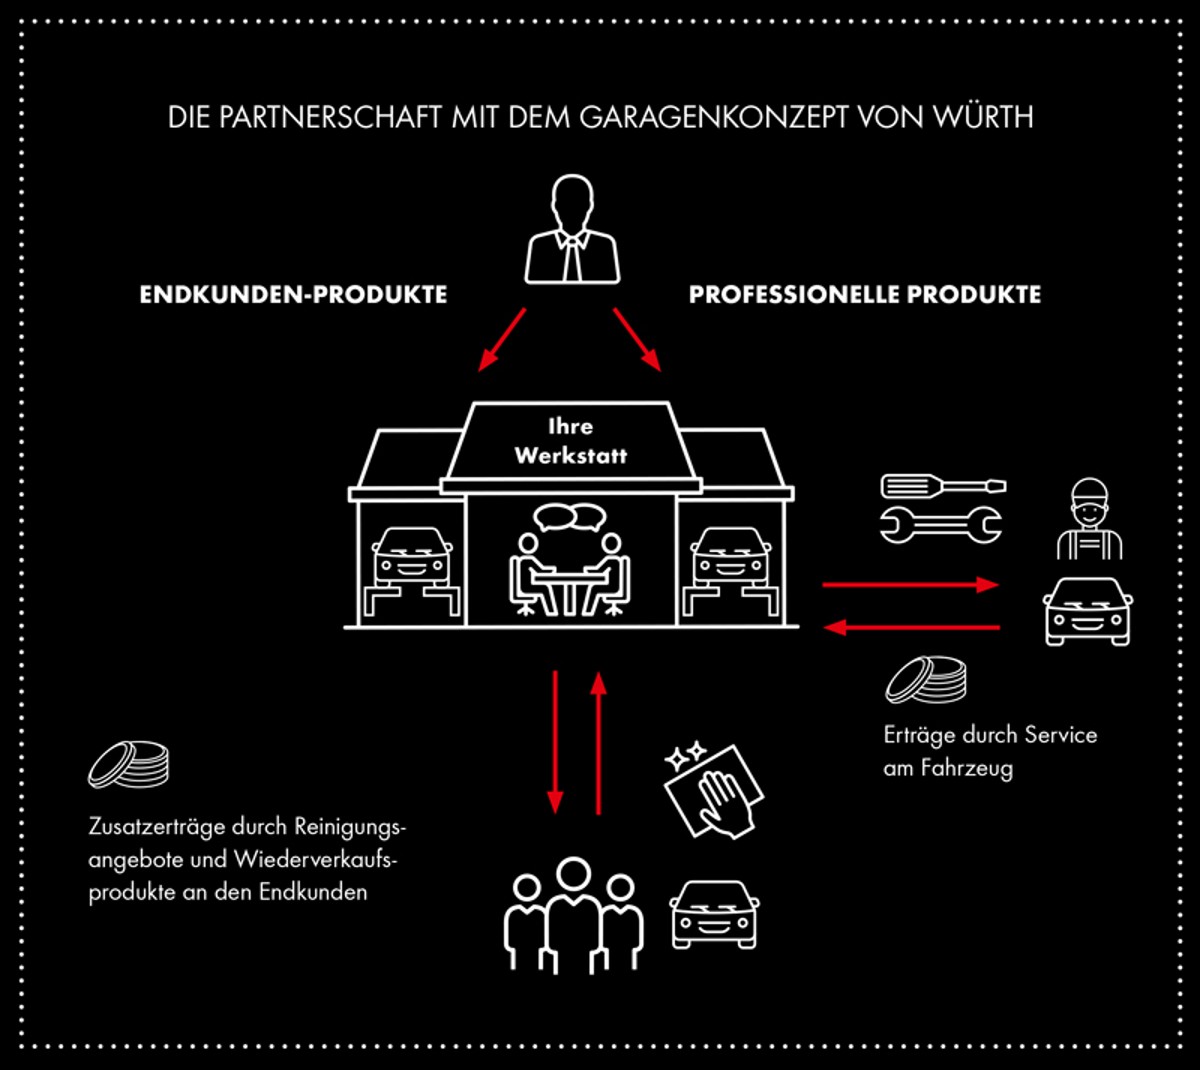 Professional Car Care by Würth